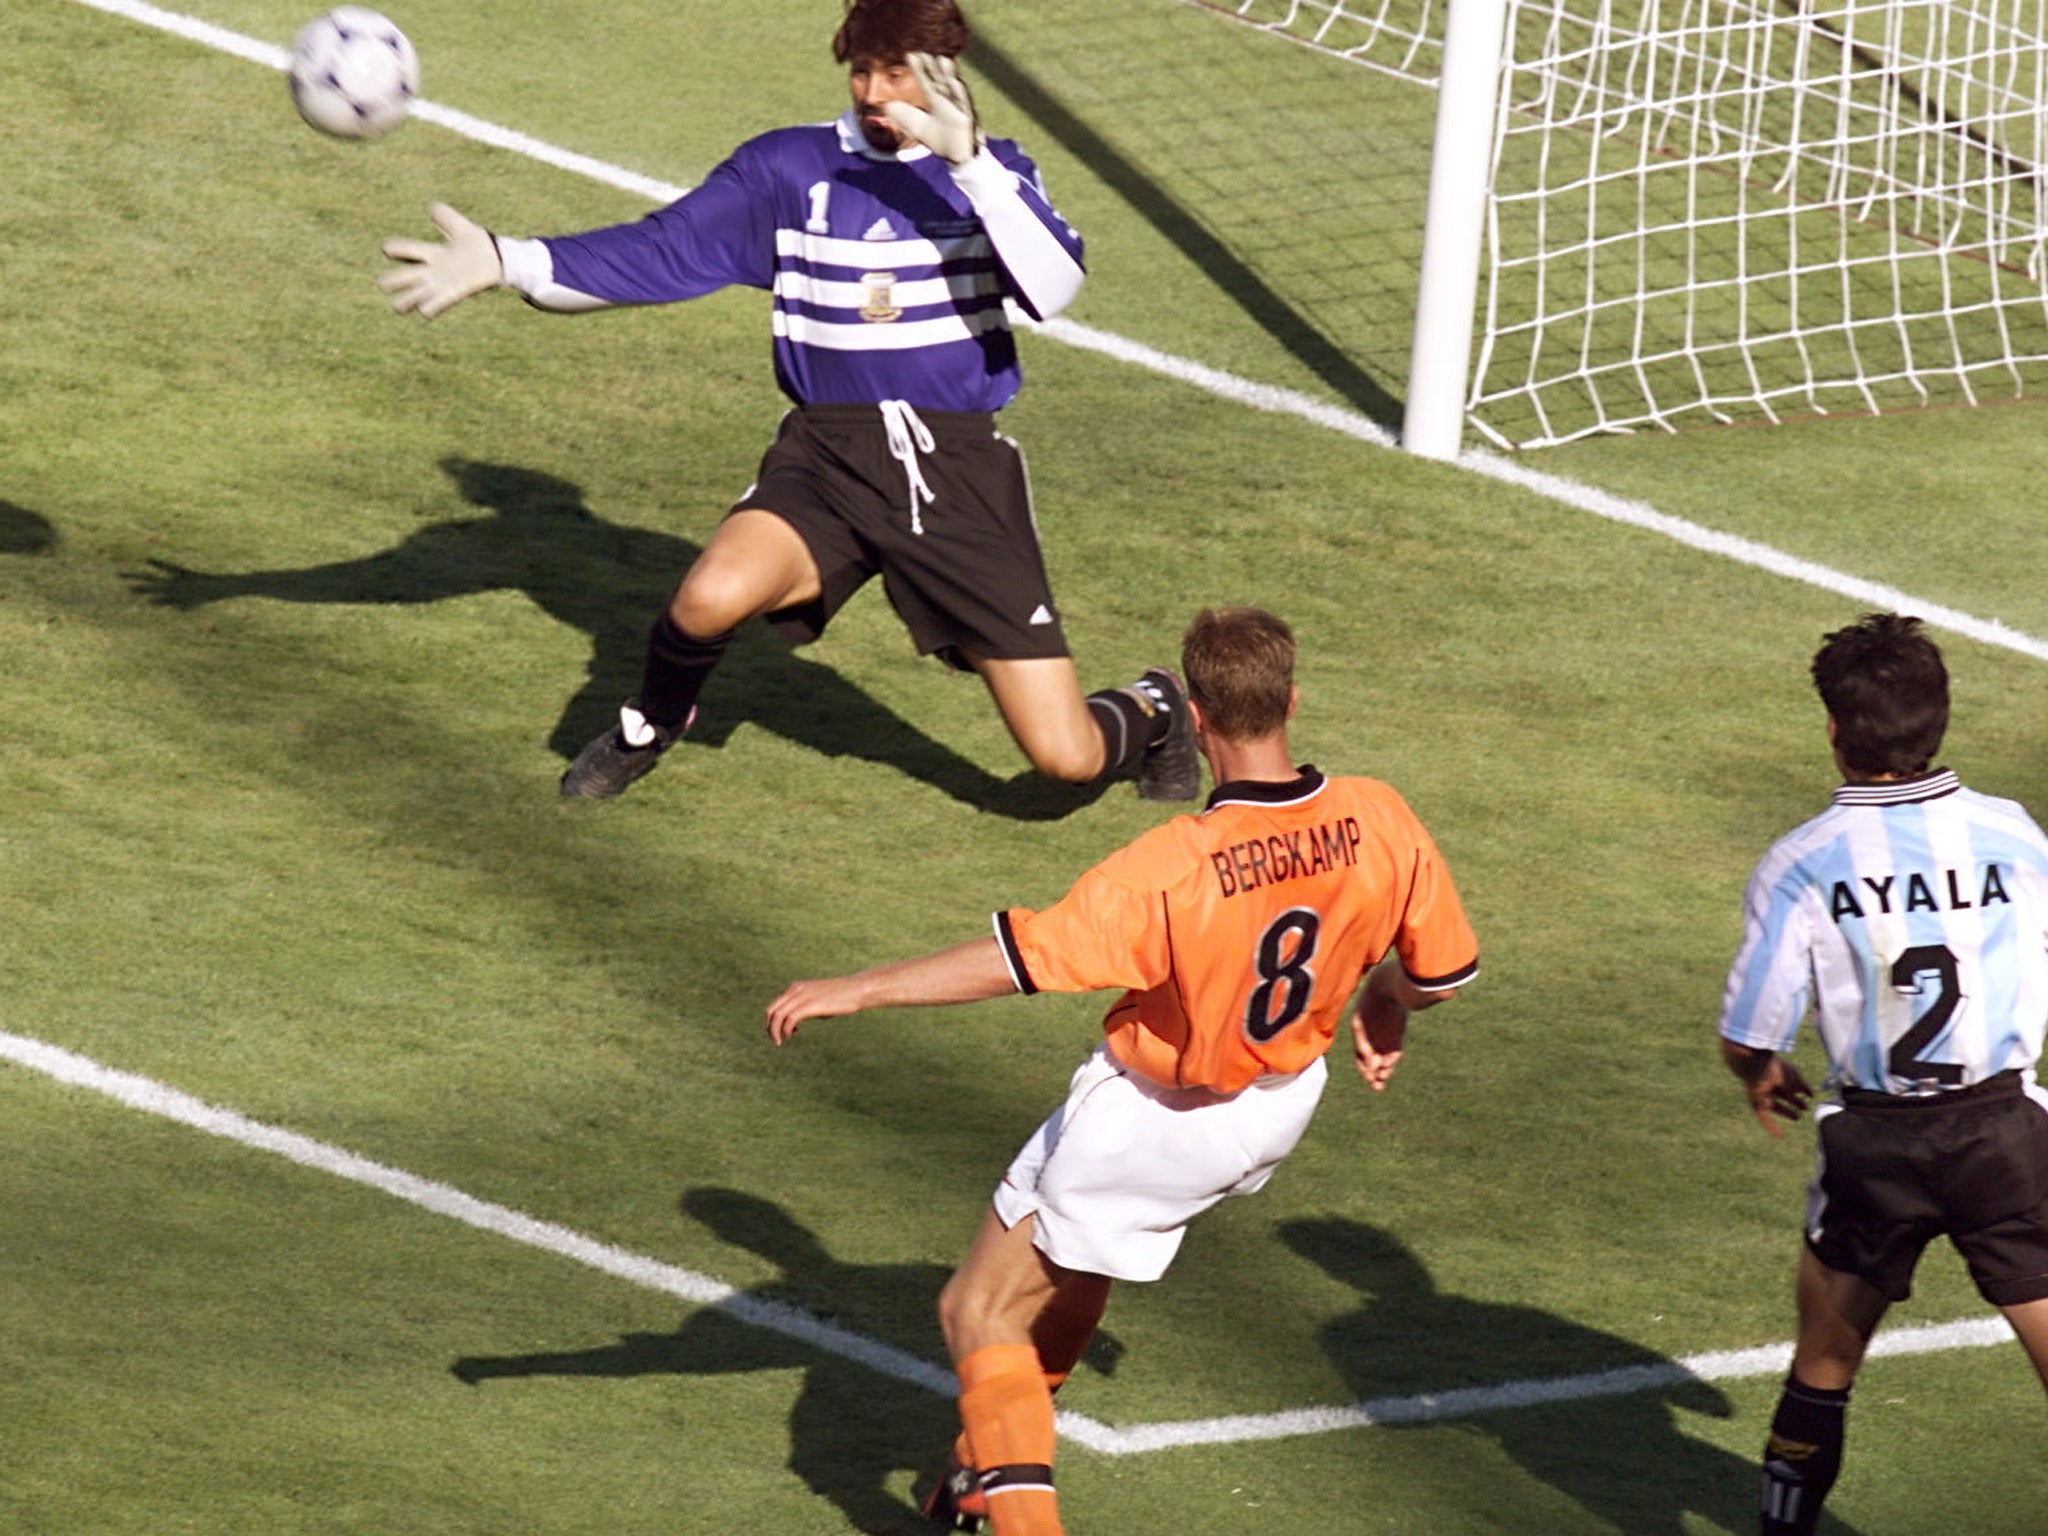 Dennis Bergkamp scored one of the greatest goals in World Cup history to knock Argentina out in 1998